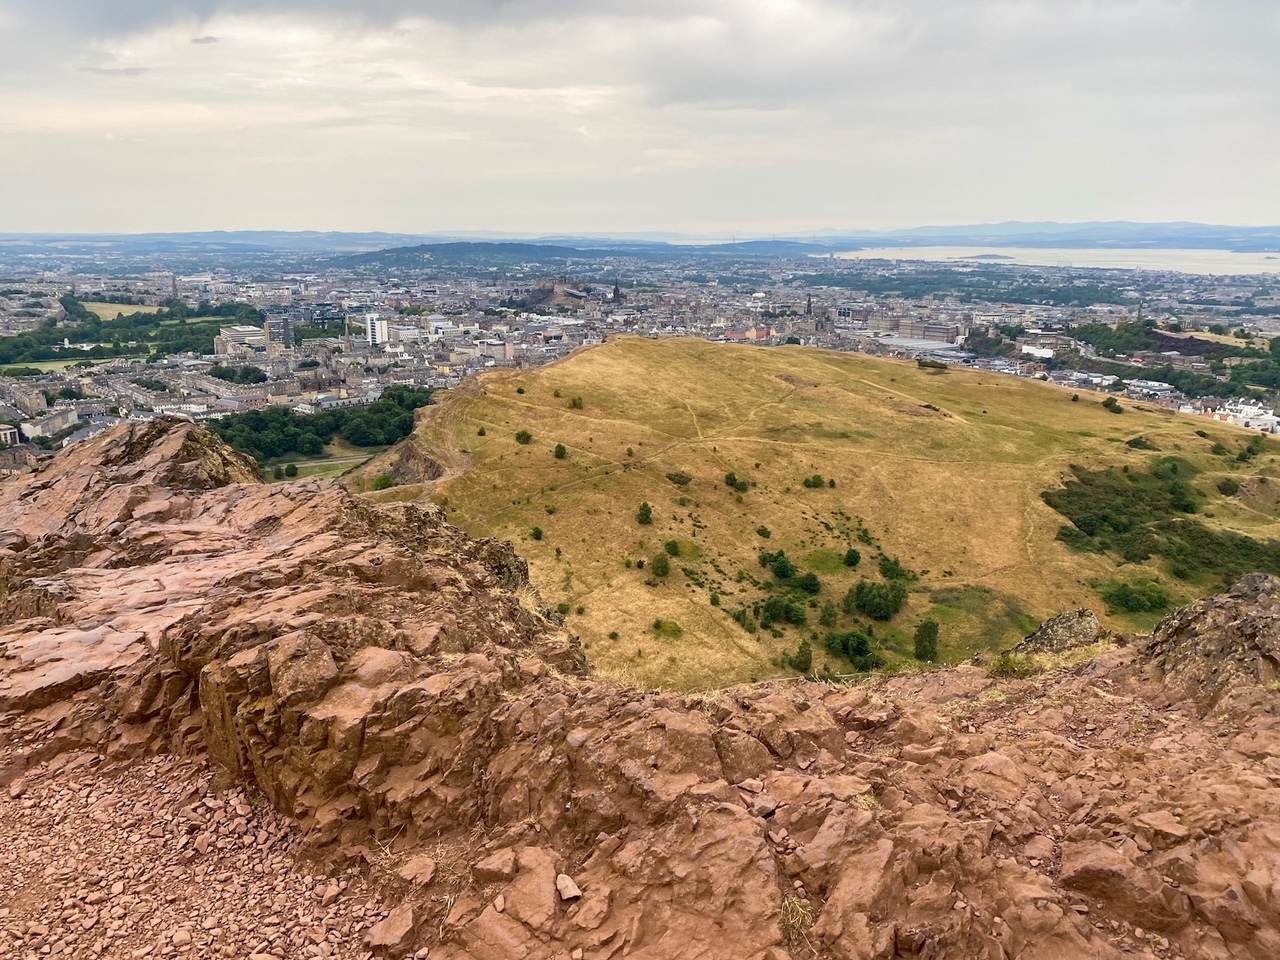 View from the top of Arthur's Seat